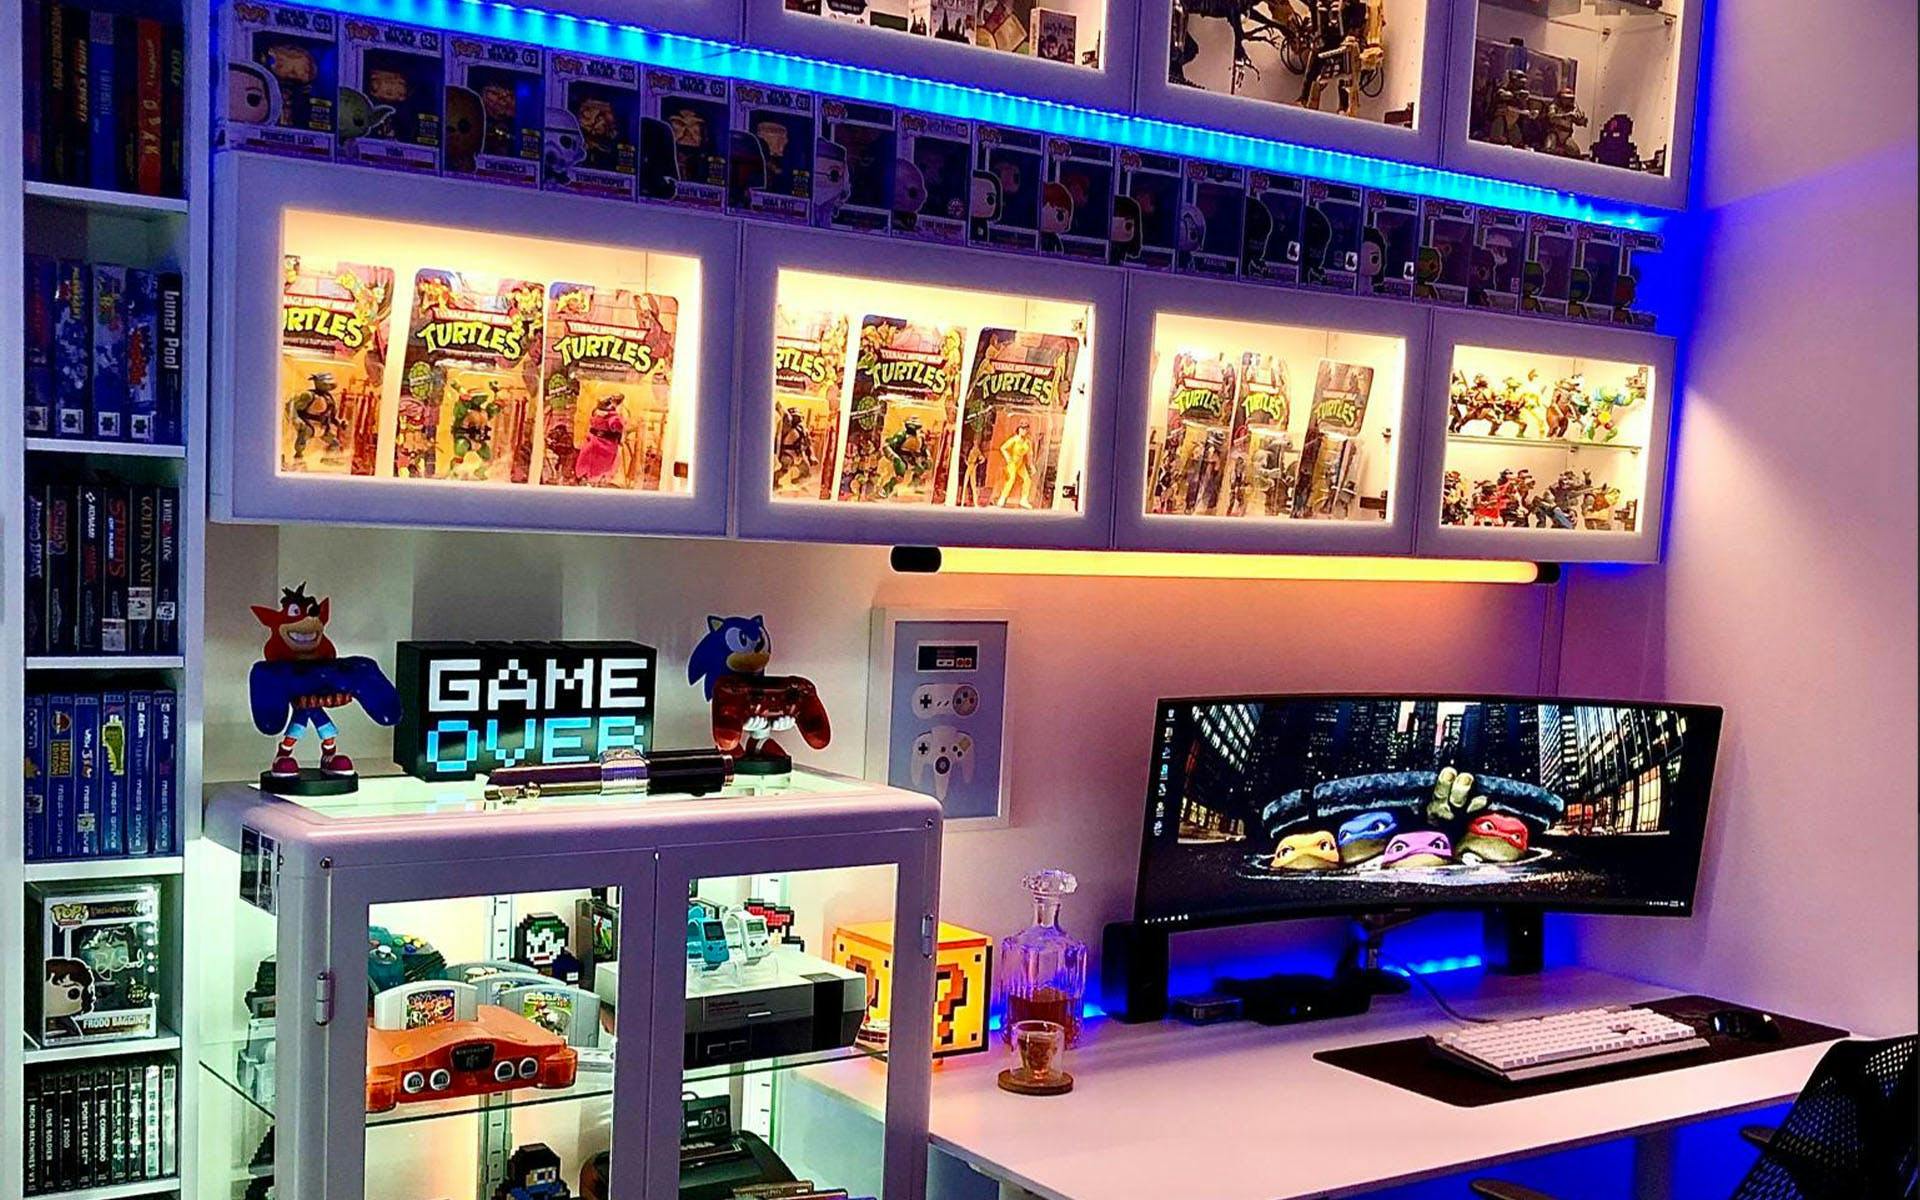 How to decorate your gaming room? Tips to enhance your setup